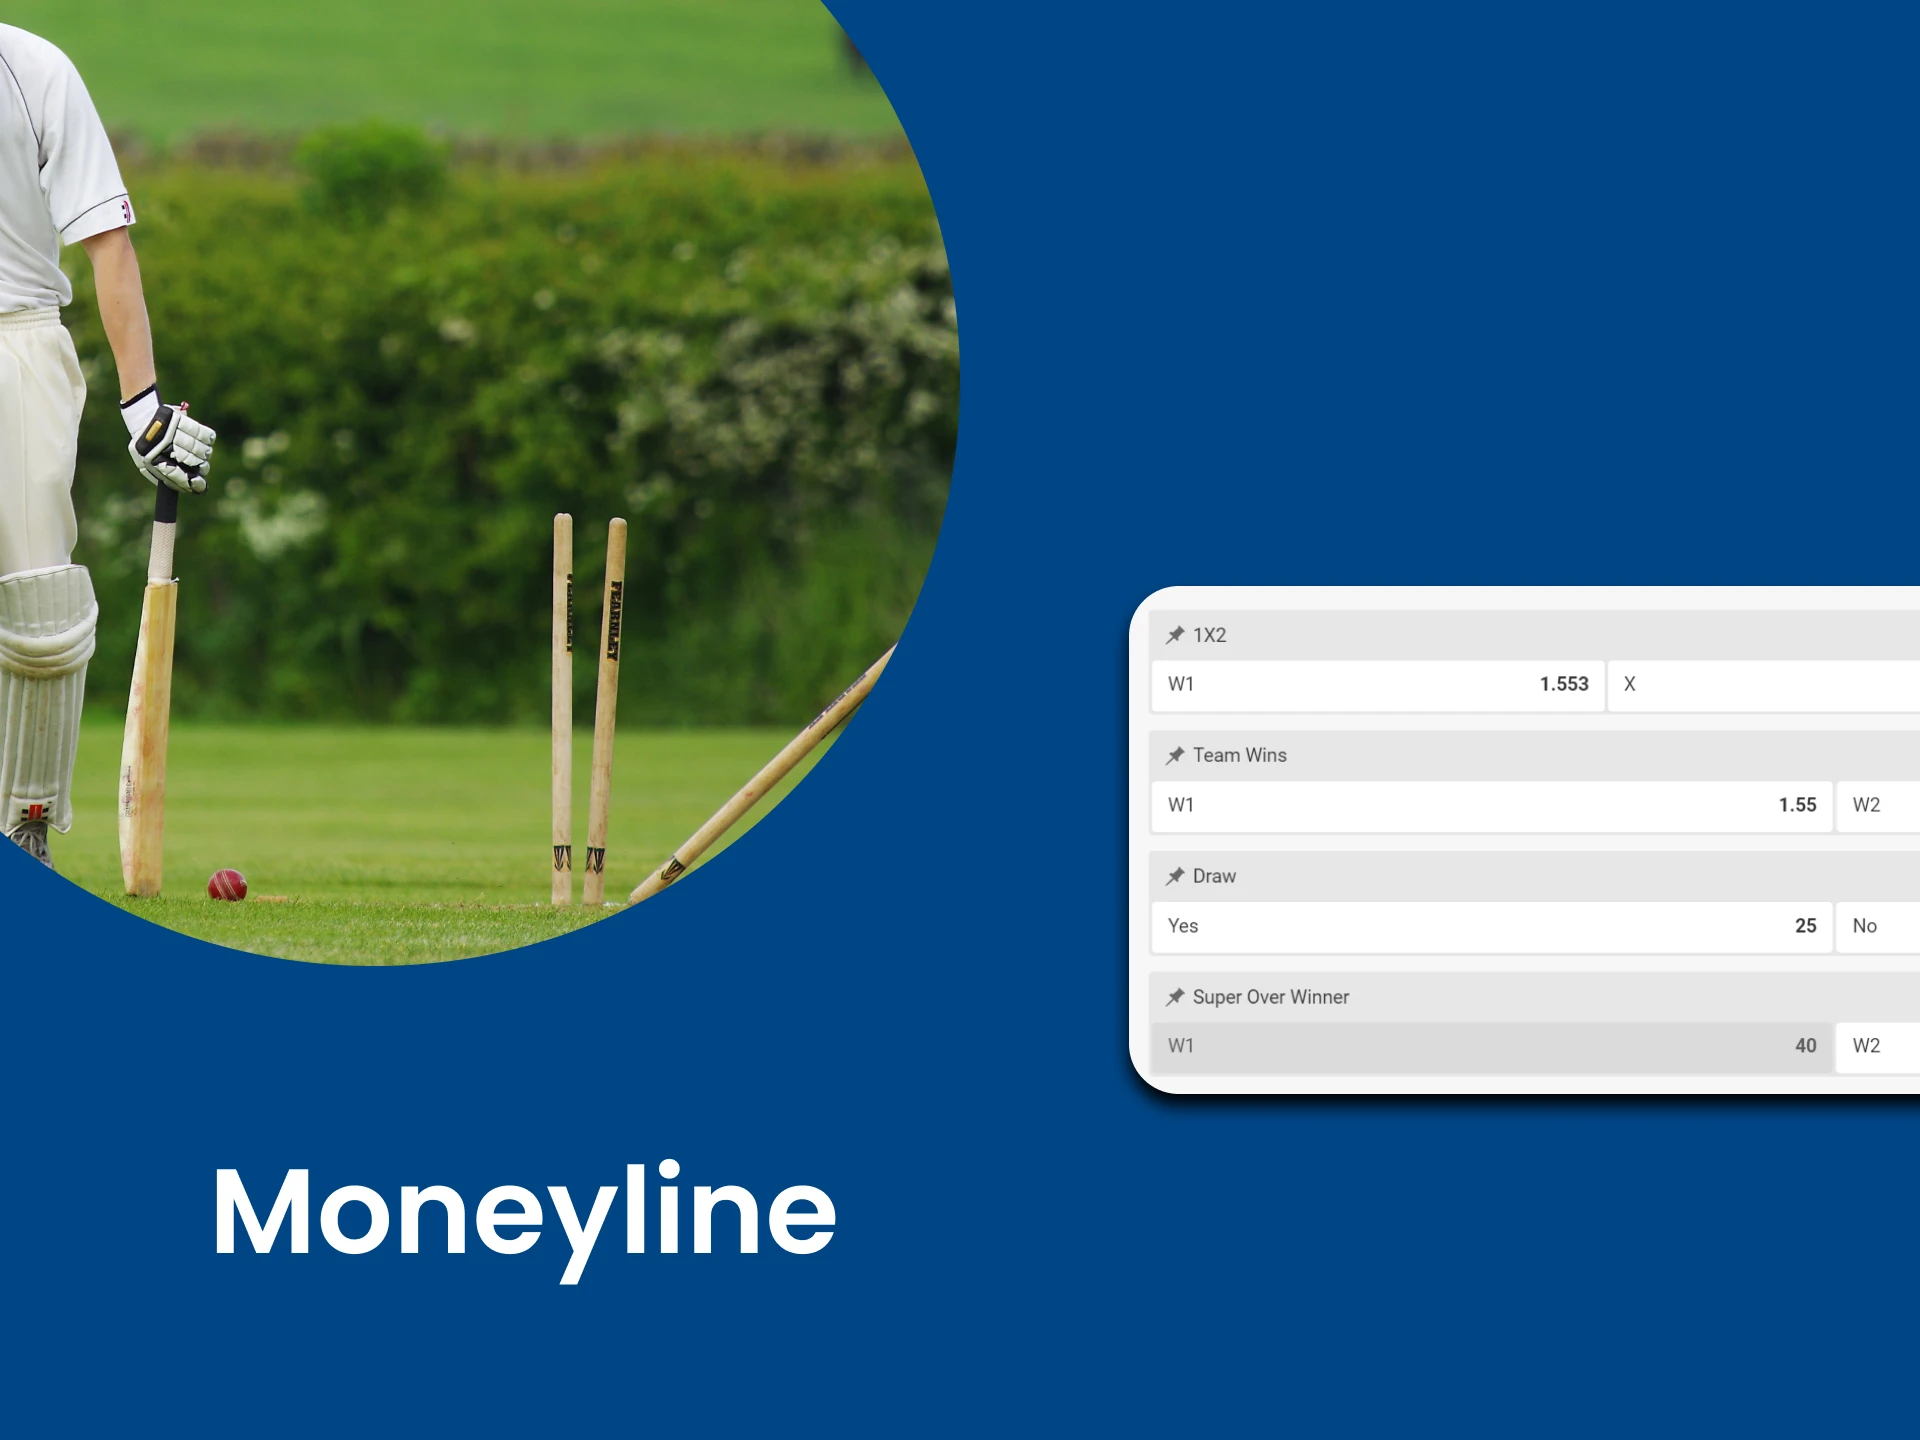 Choose the "Moneyline" strategy for sports betting.